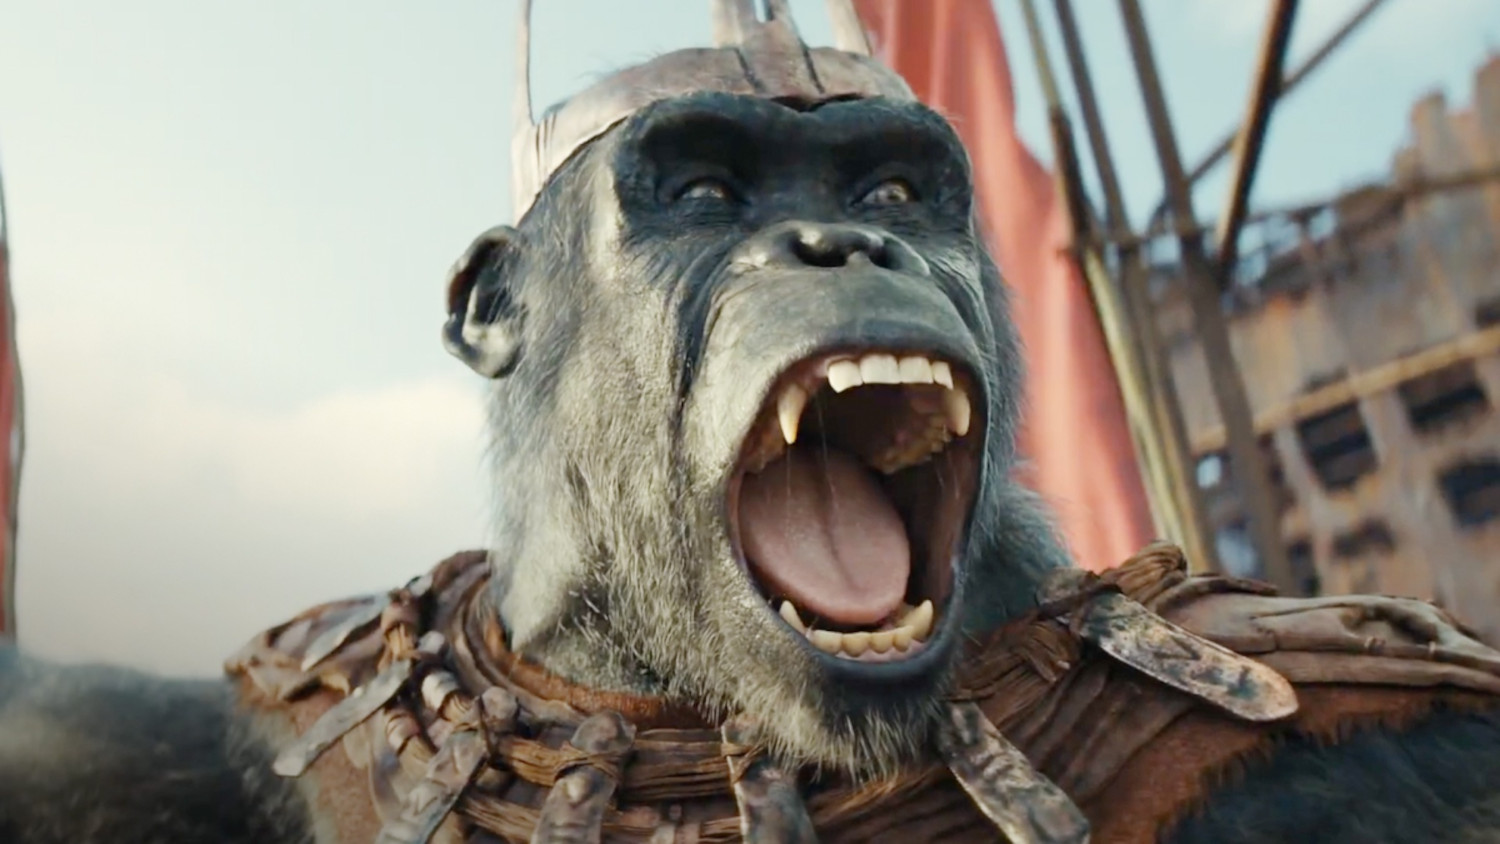 Kingdom of the Planet of The Apes Rotten Tomatoes Score, Box Office Is Here